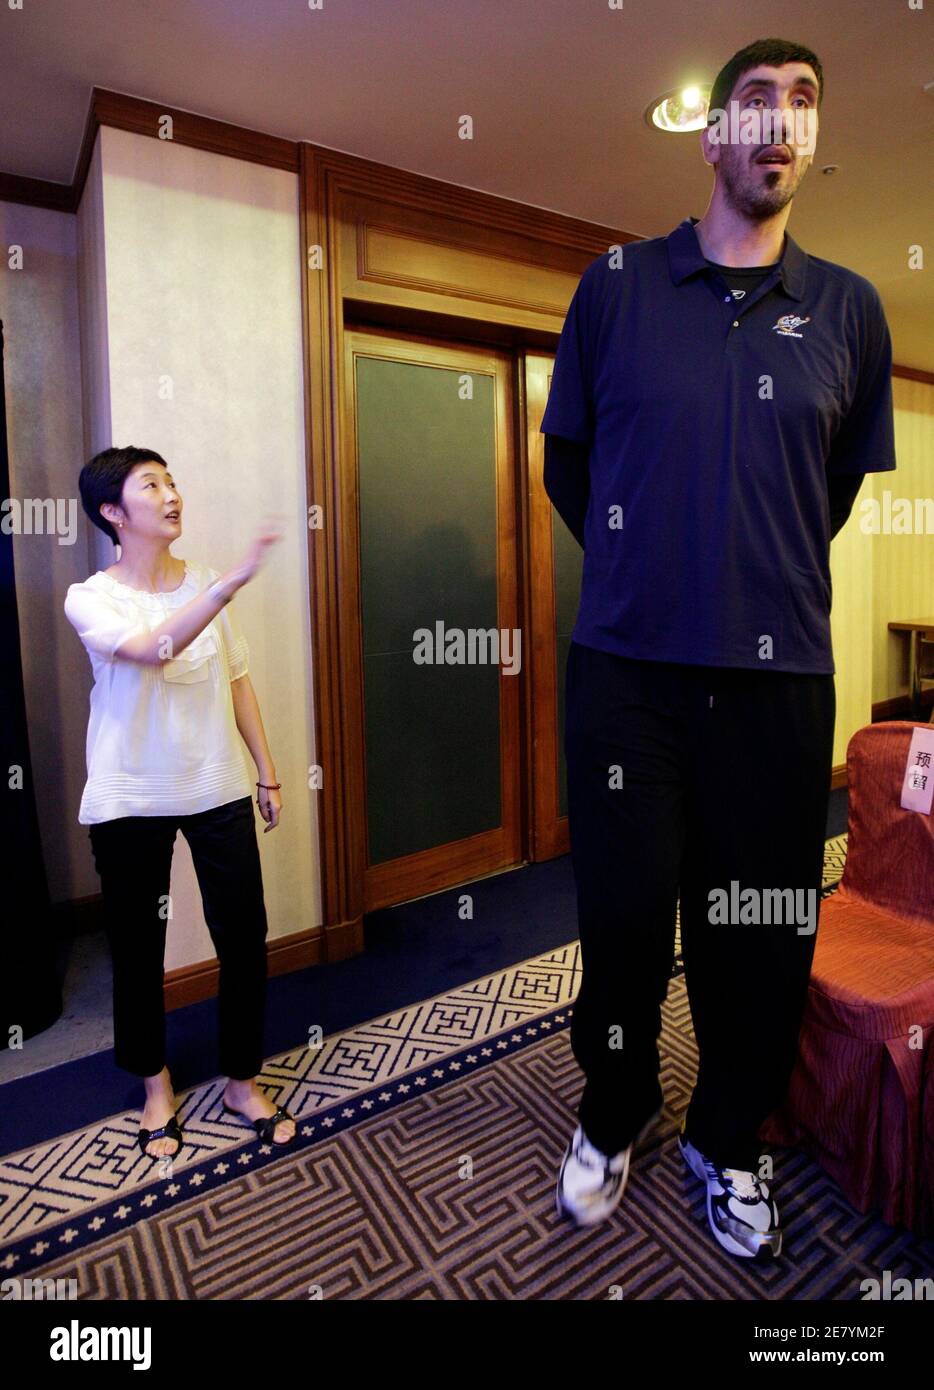 A woman gestures to former Washington Bullets player Gheorghe Muresan of Romania as he arrives for a news conference in Beijing, September 8, 2009. The Washington Wizards are commemorating the 30th anniversary of the team's 1979 trip to China with a 10-day, five-city goodwill tour. The Wizards were previously known as the Washington Bullets.   REUTERS/Jason Lee (CHINA SPORT BASKETBALL) Stock Photo